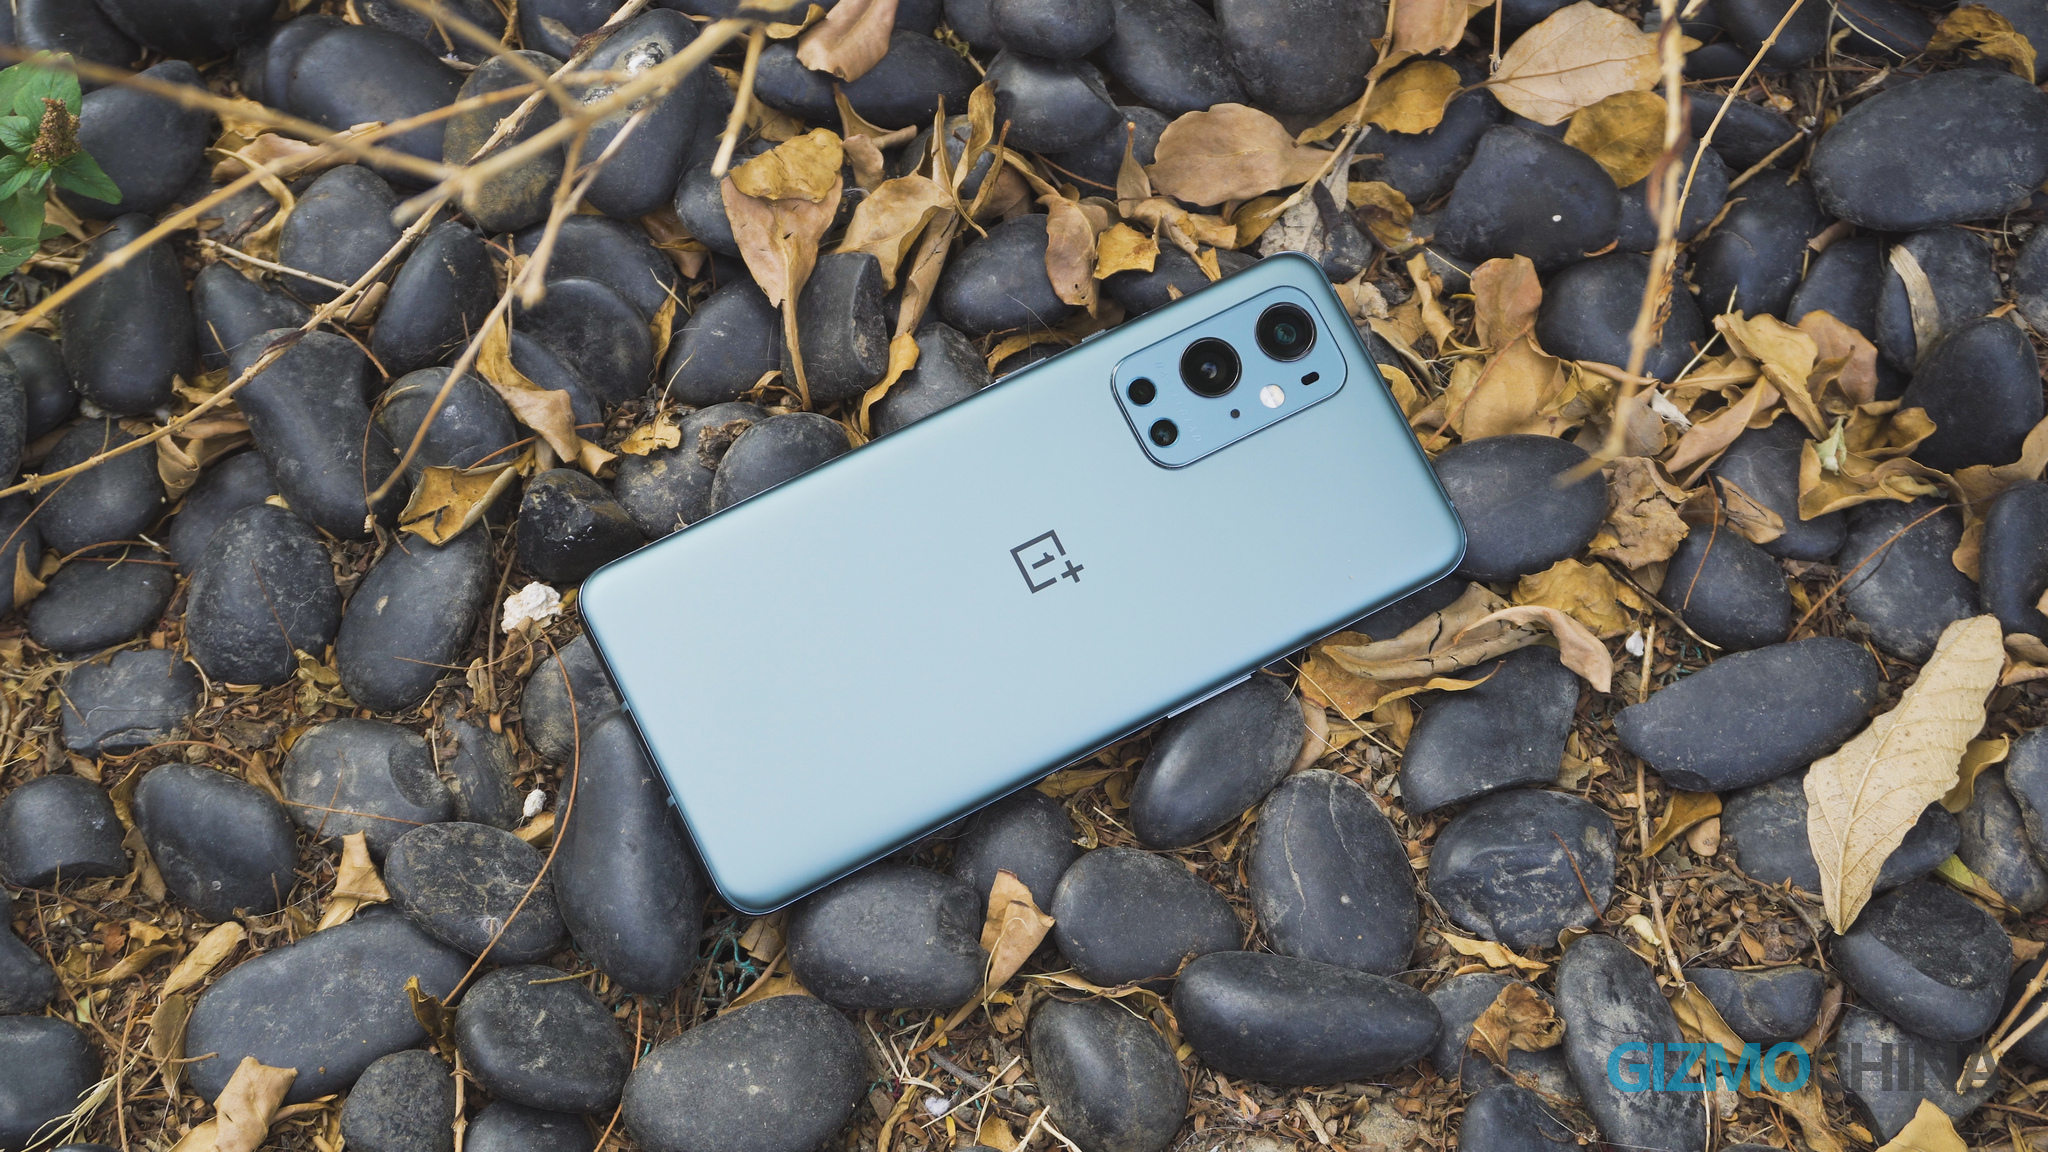 OnePlus teams up with Hasselblad to launch OnePlus 9 and 9 Pro smartphones:  Digital Photography Review